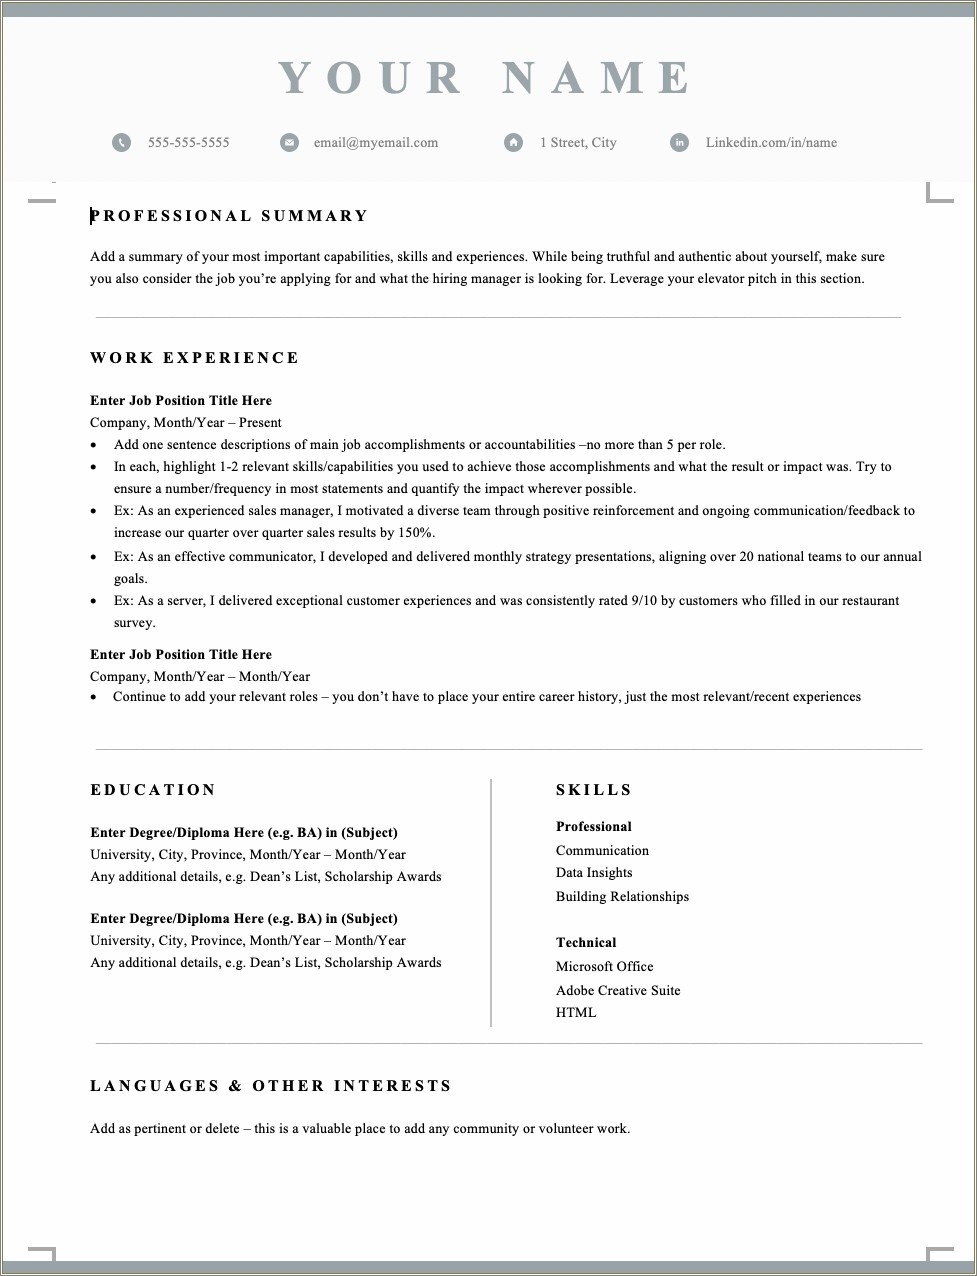 Diploma Resume Format Free Download - Resume Example Gallery